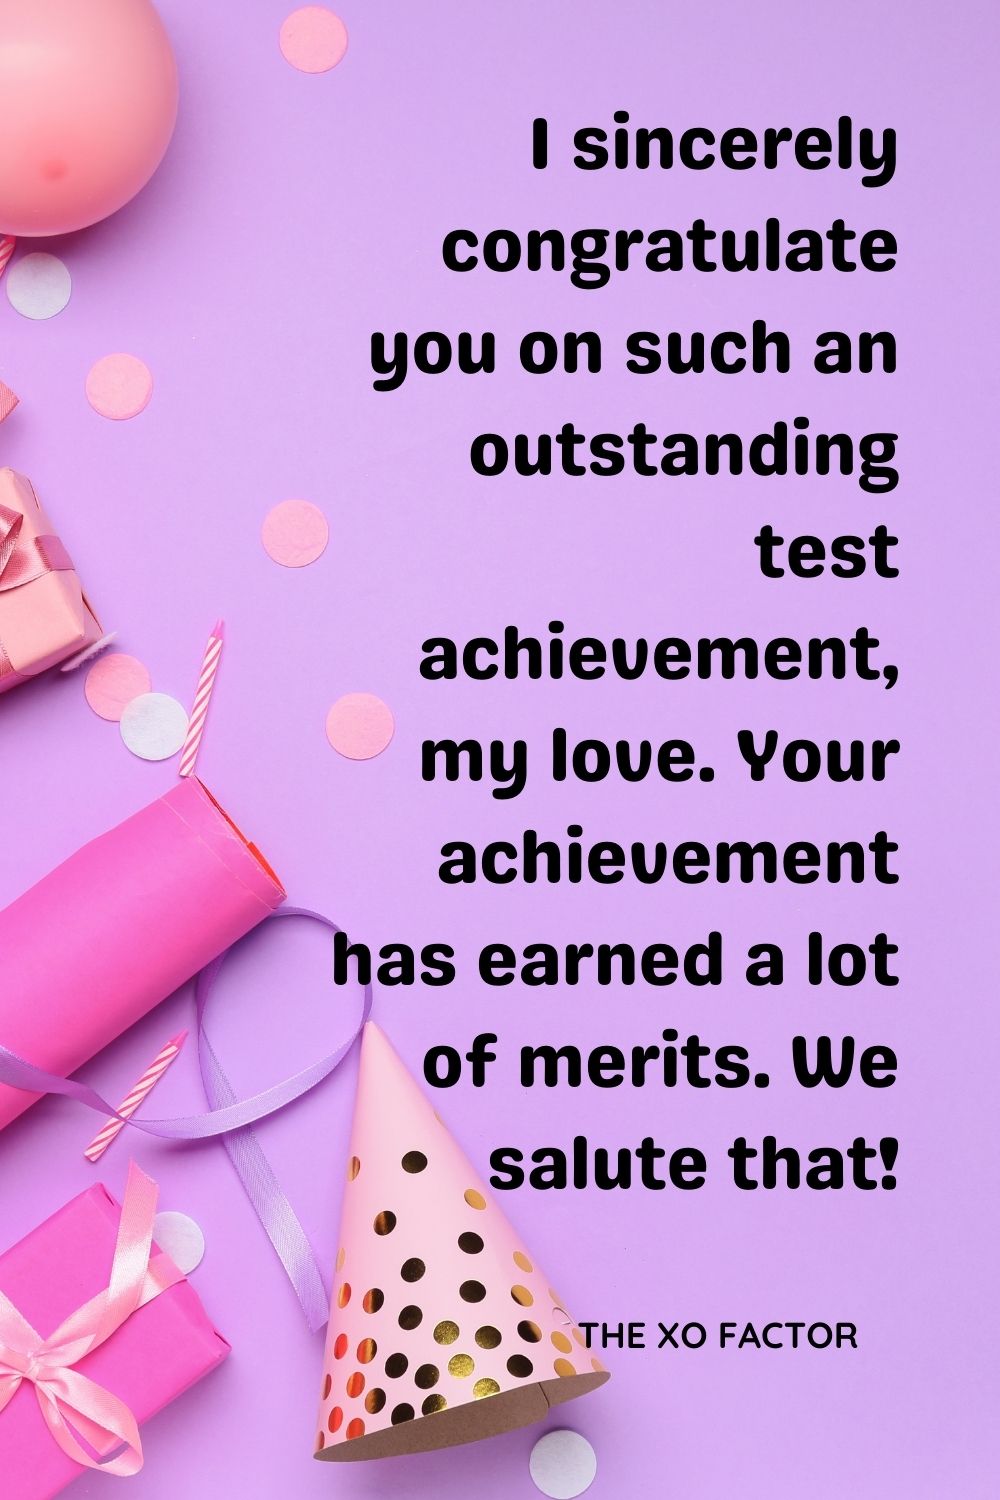 I sincerely congratulate you on such an outstanding test achievement, my love. Your achievement has earned a lot of merits. We salute that!